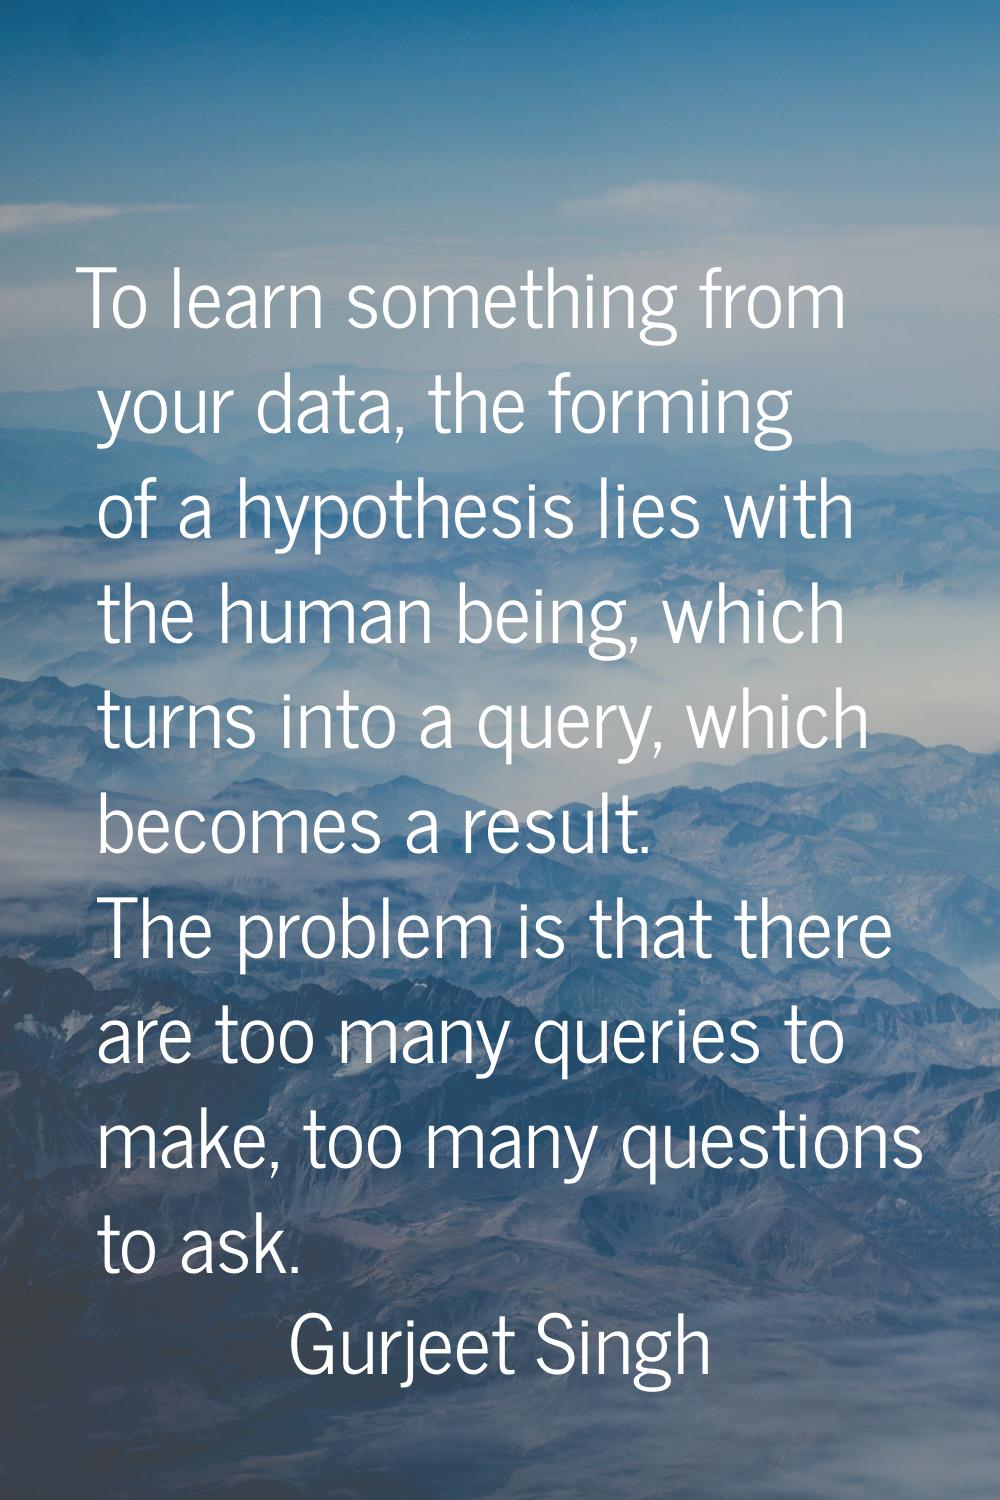 To learn something from your data, the forming of a hypothesis lies with the human being, which tur